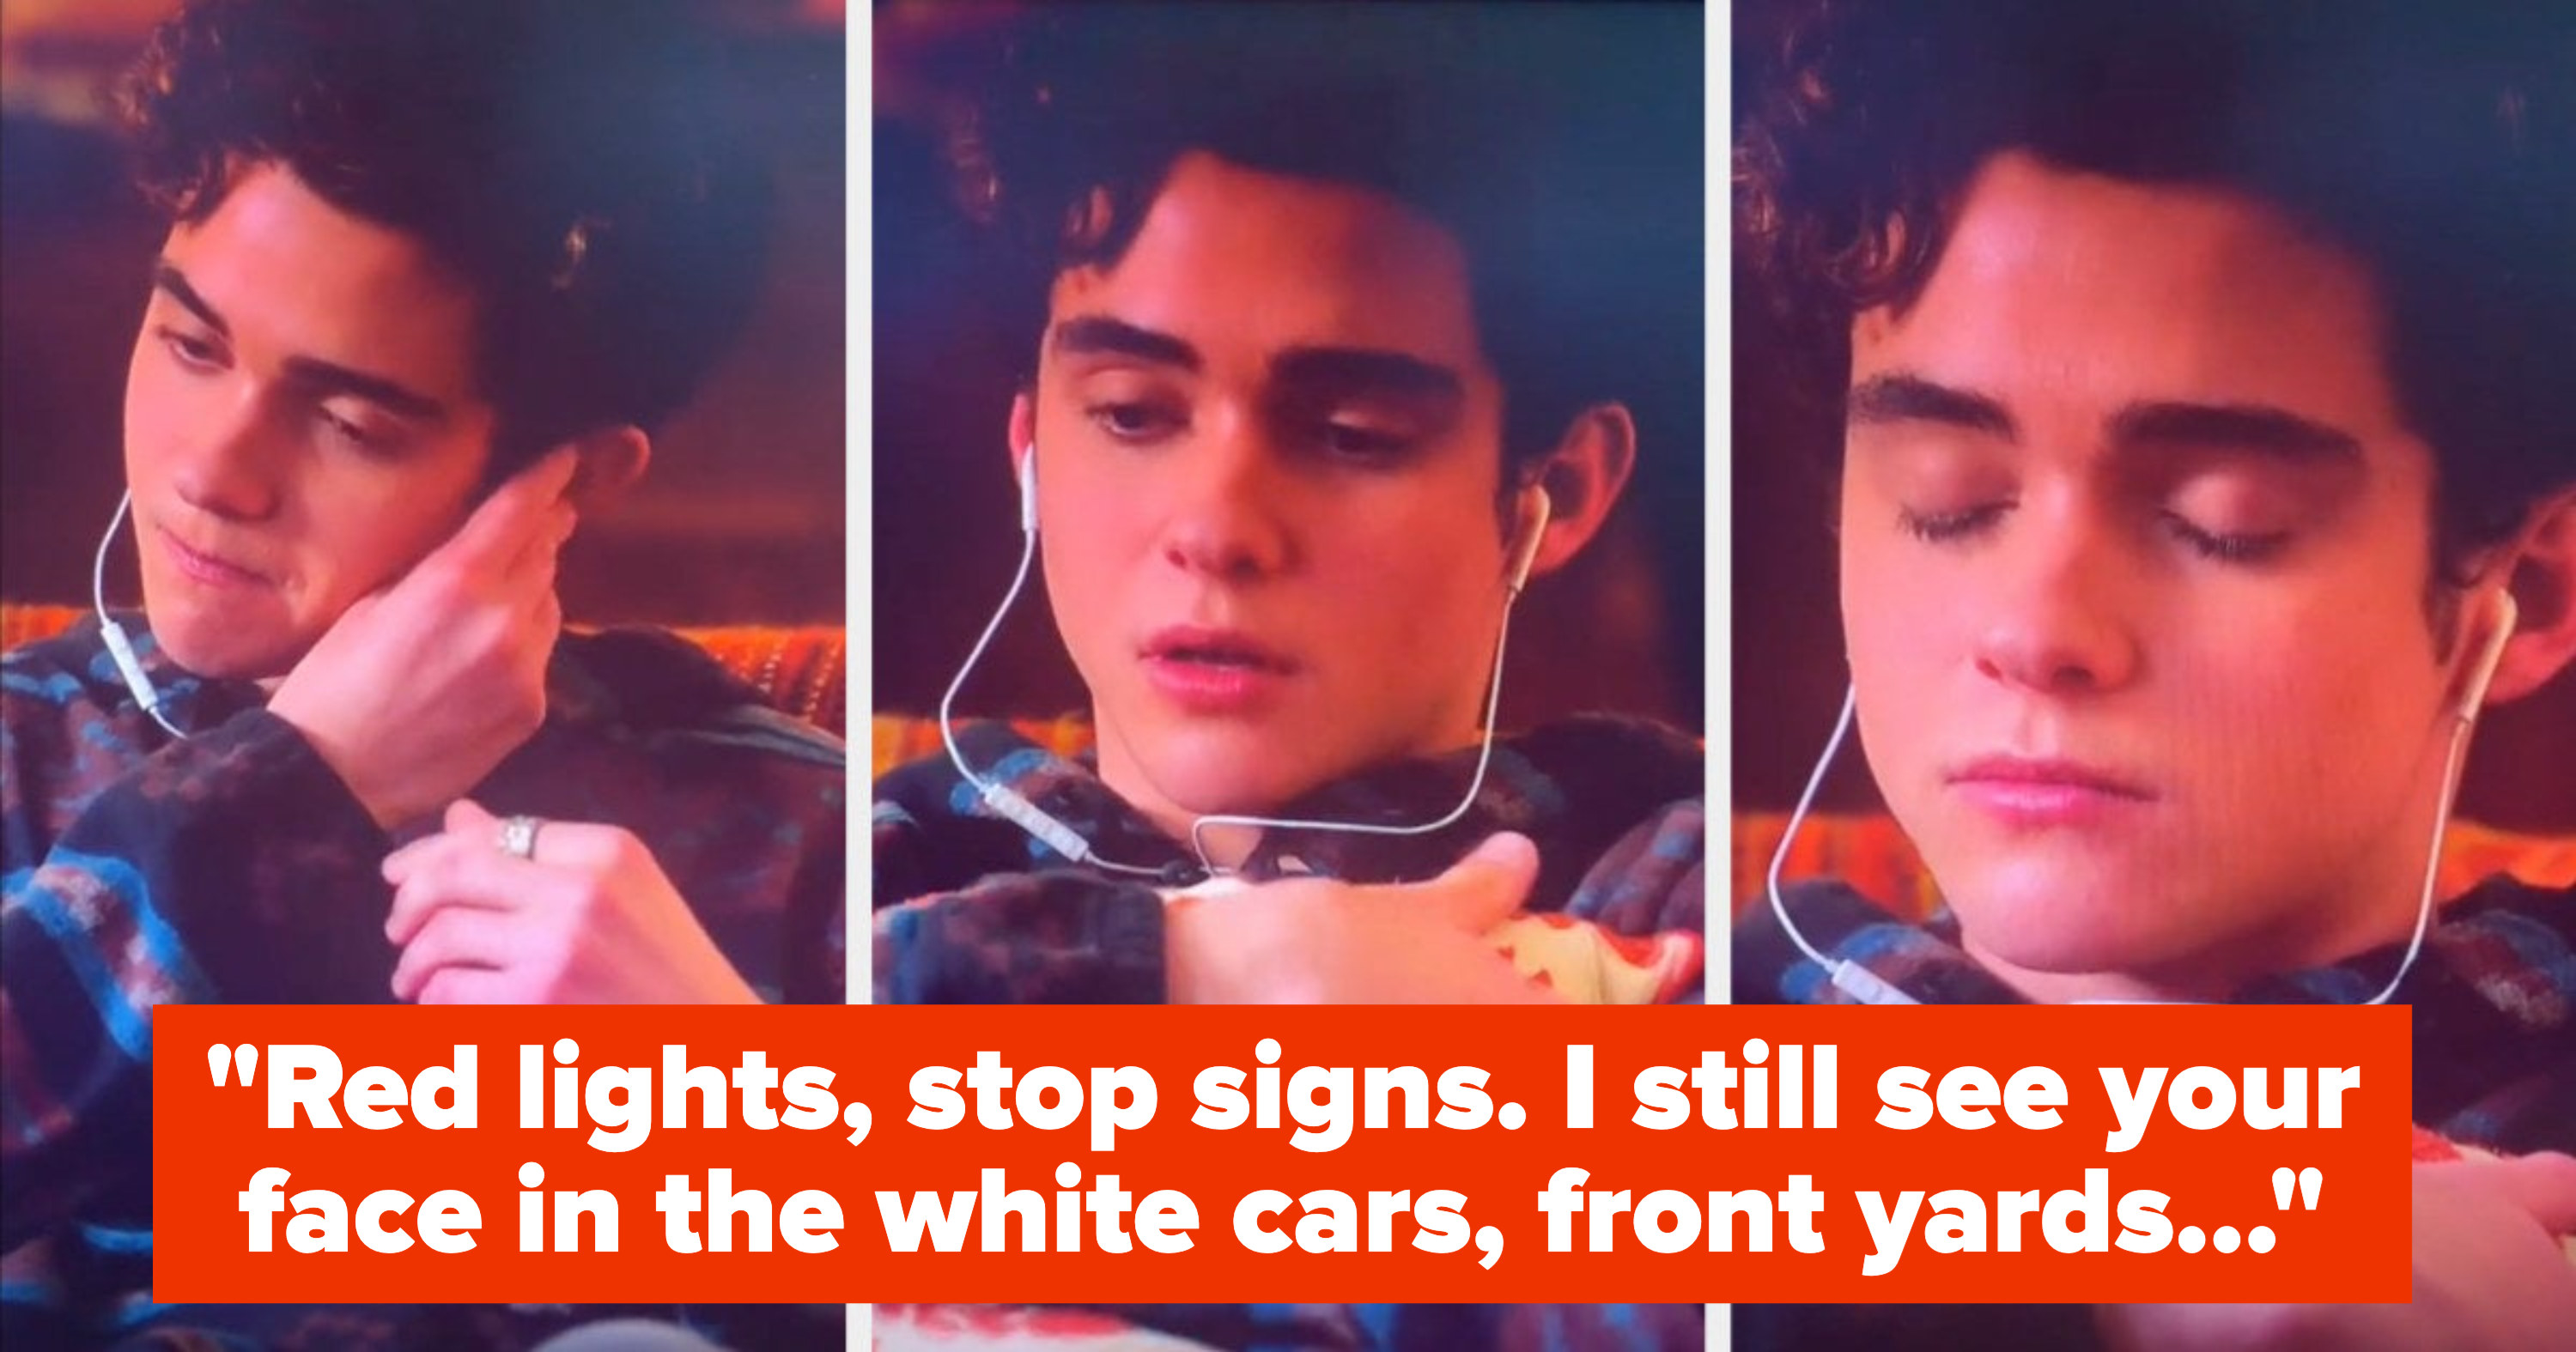 &quot;Red lights, stop signs, I still see your face in the white cars, front yards...&quot; while Ricky listens to music